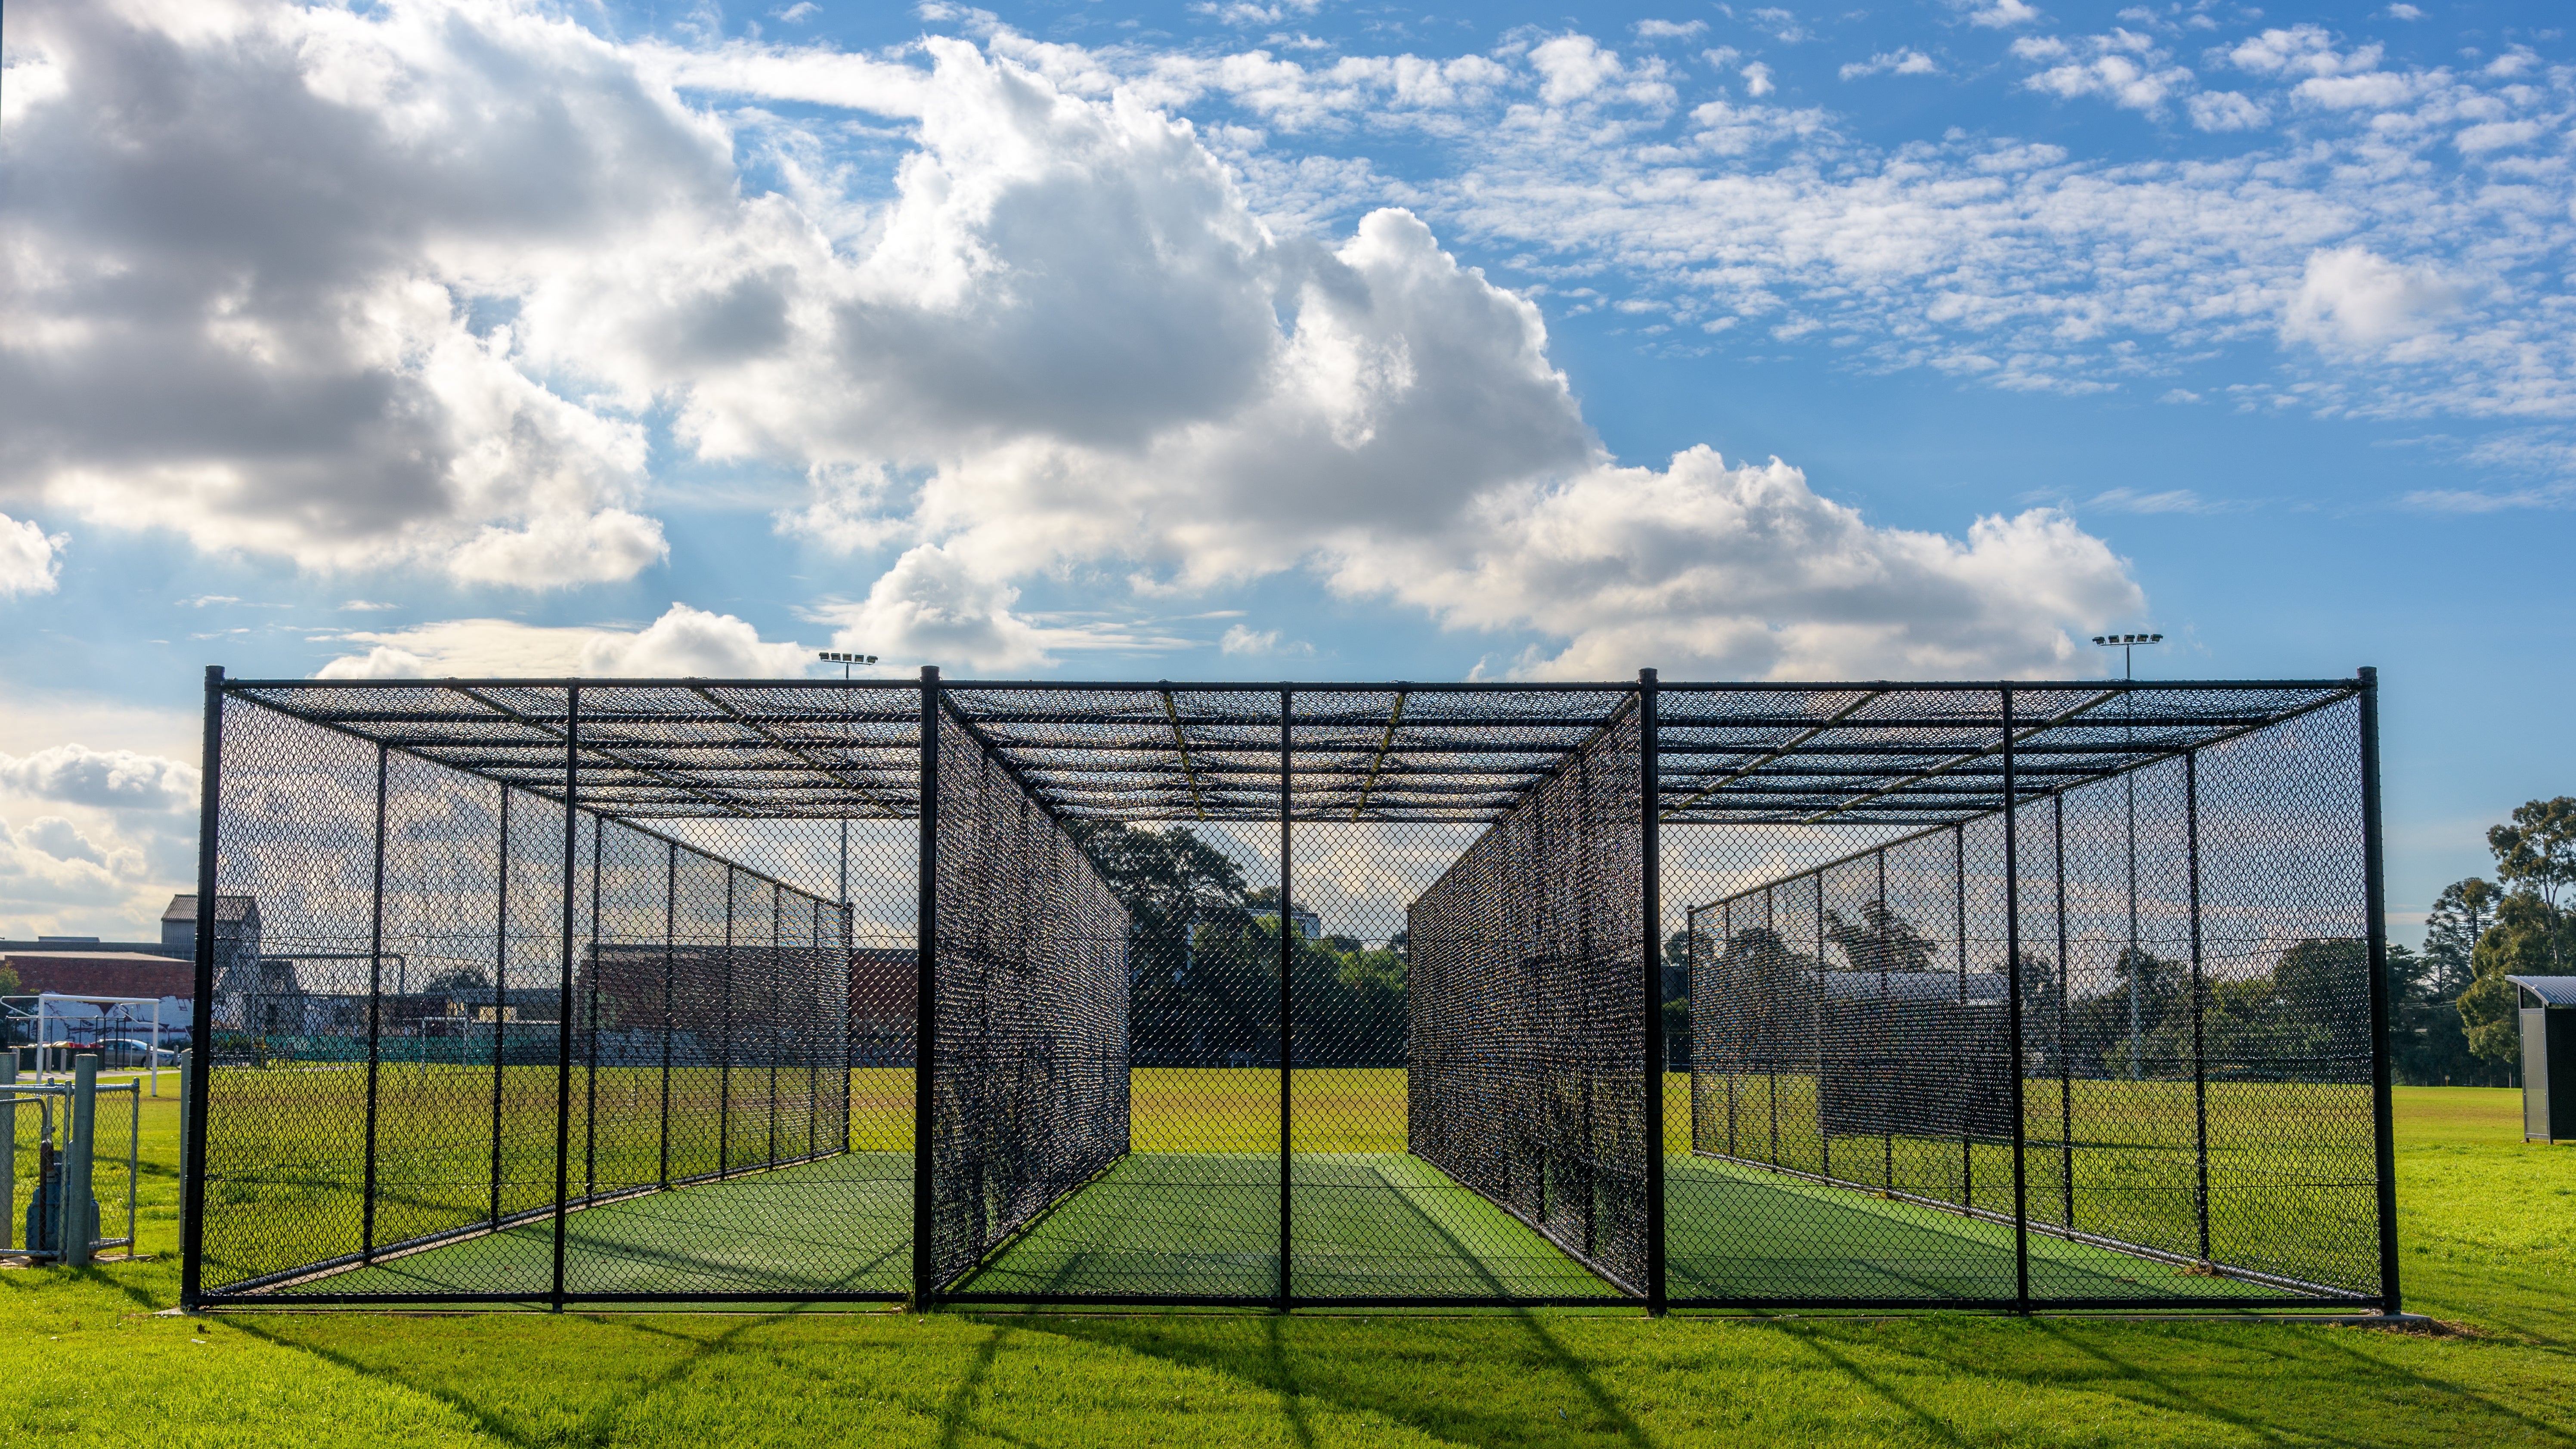 Premium Batting Cages for Training & Practice - The Baseball Home